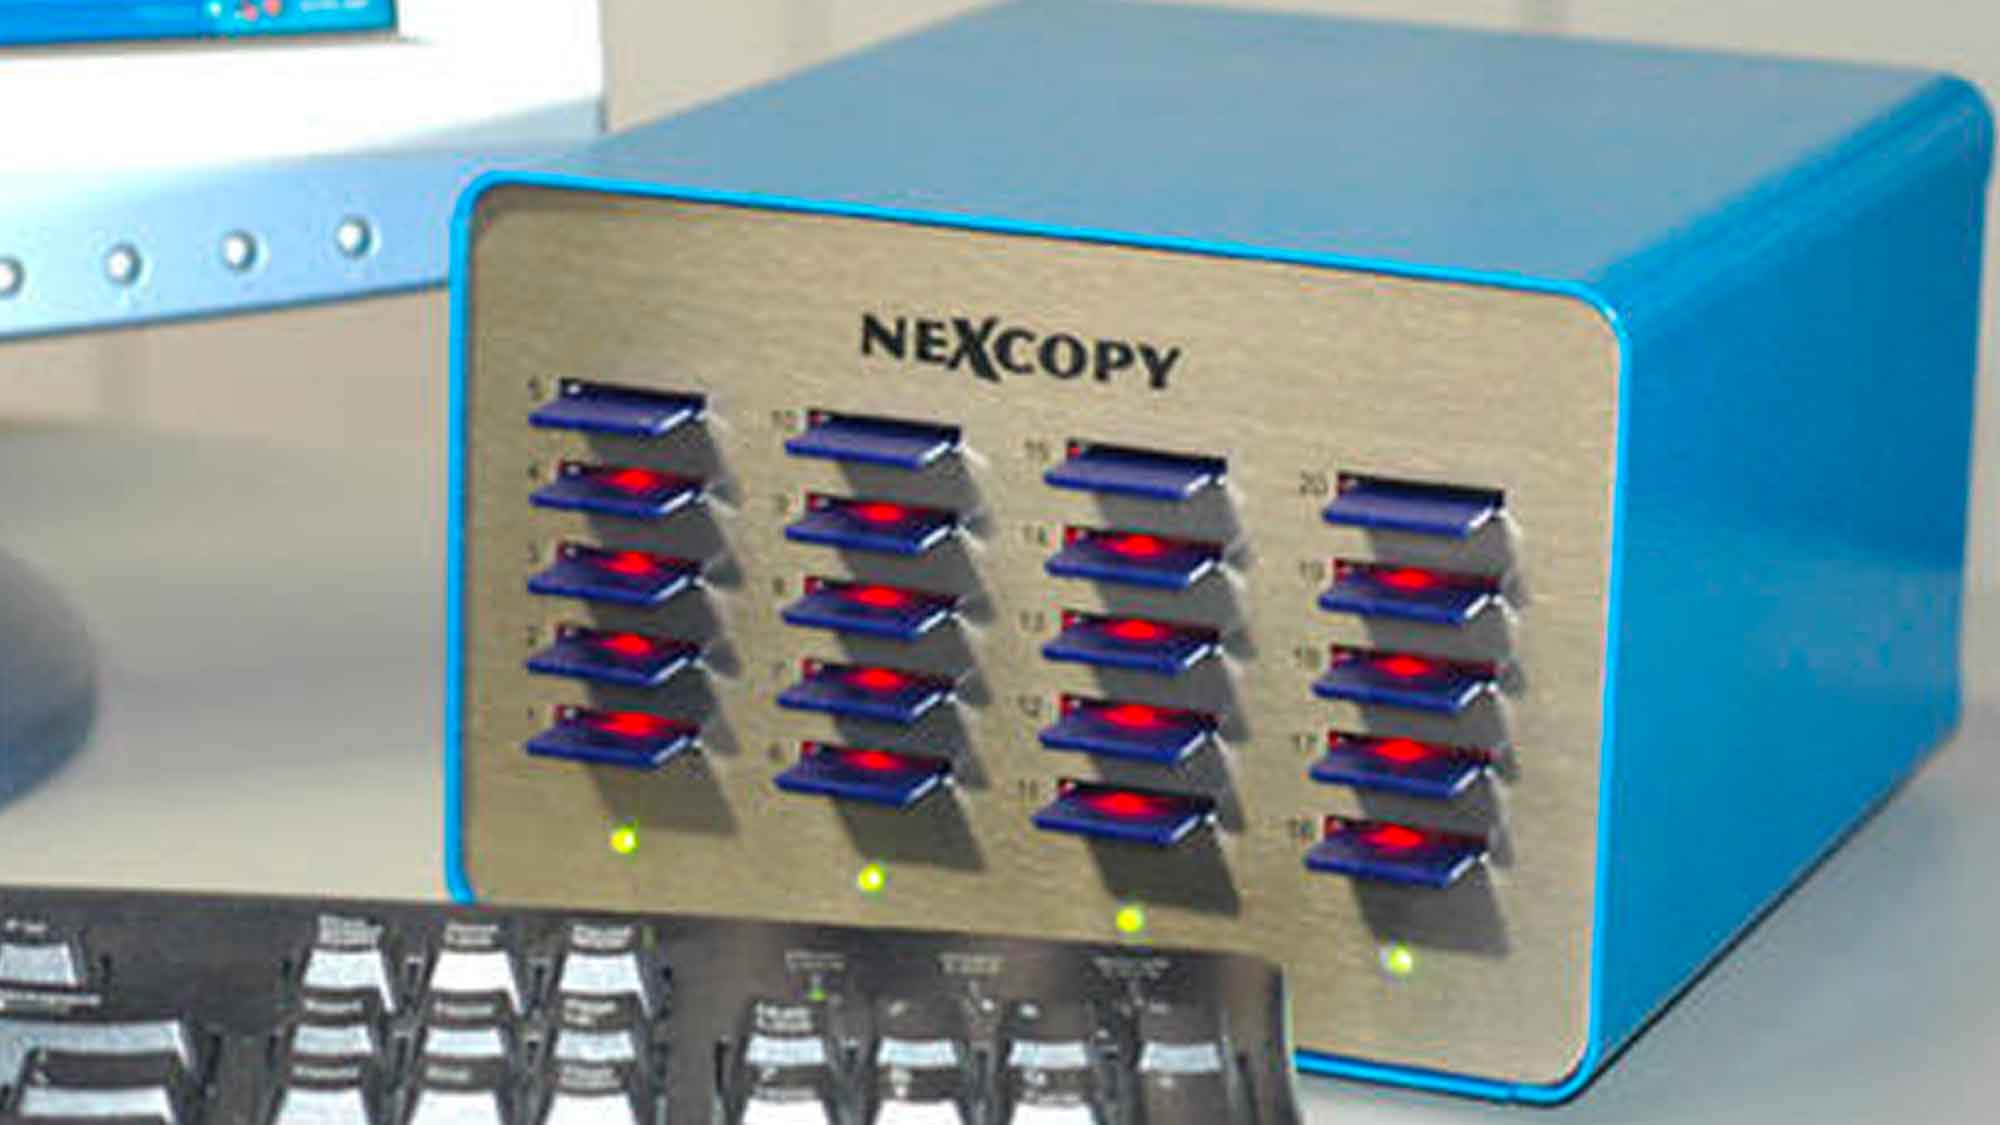 The SD Card Duplicator Knocks Down 20 Cards At a Time